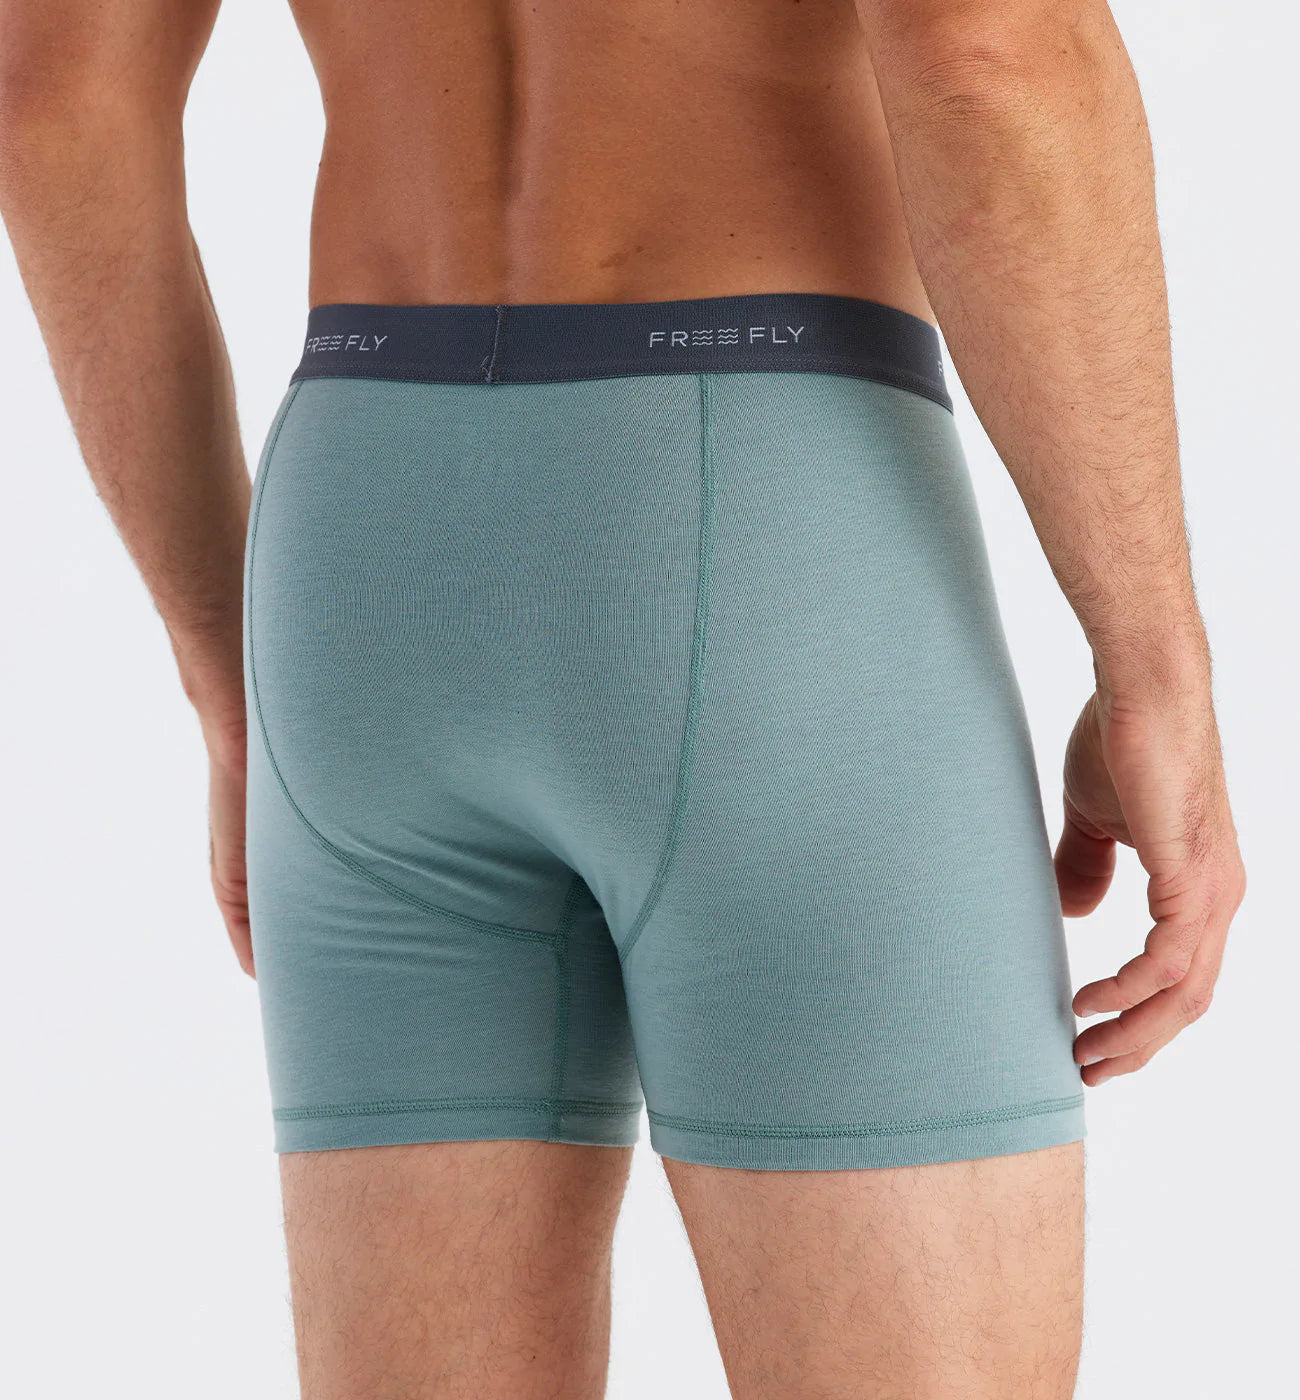 Men's Elevate Boxer Brief - Free Fly